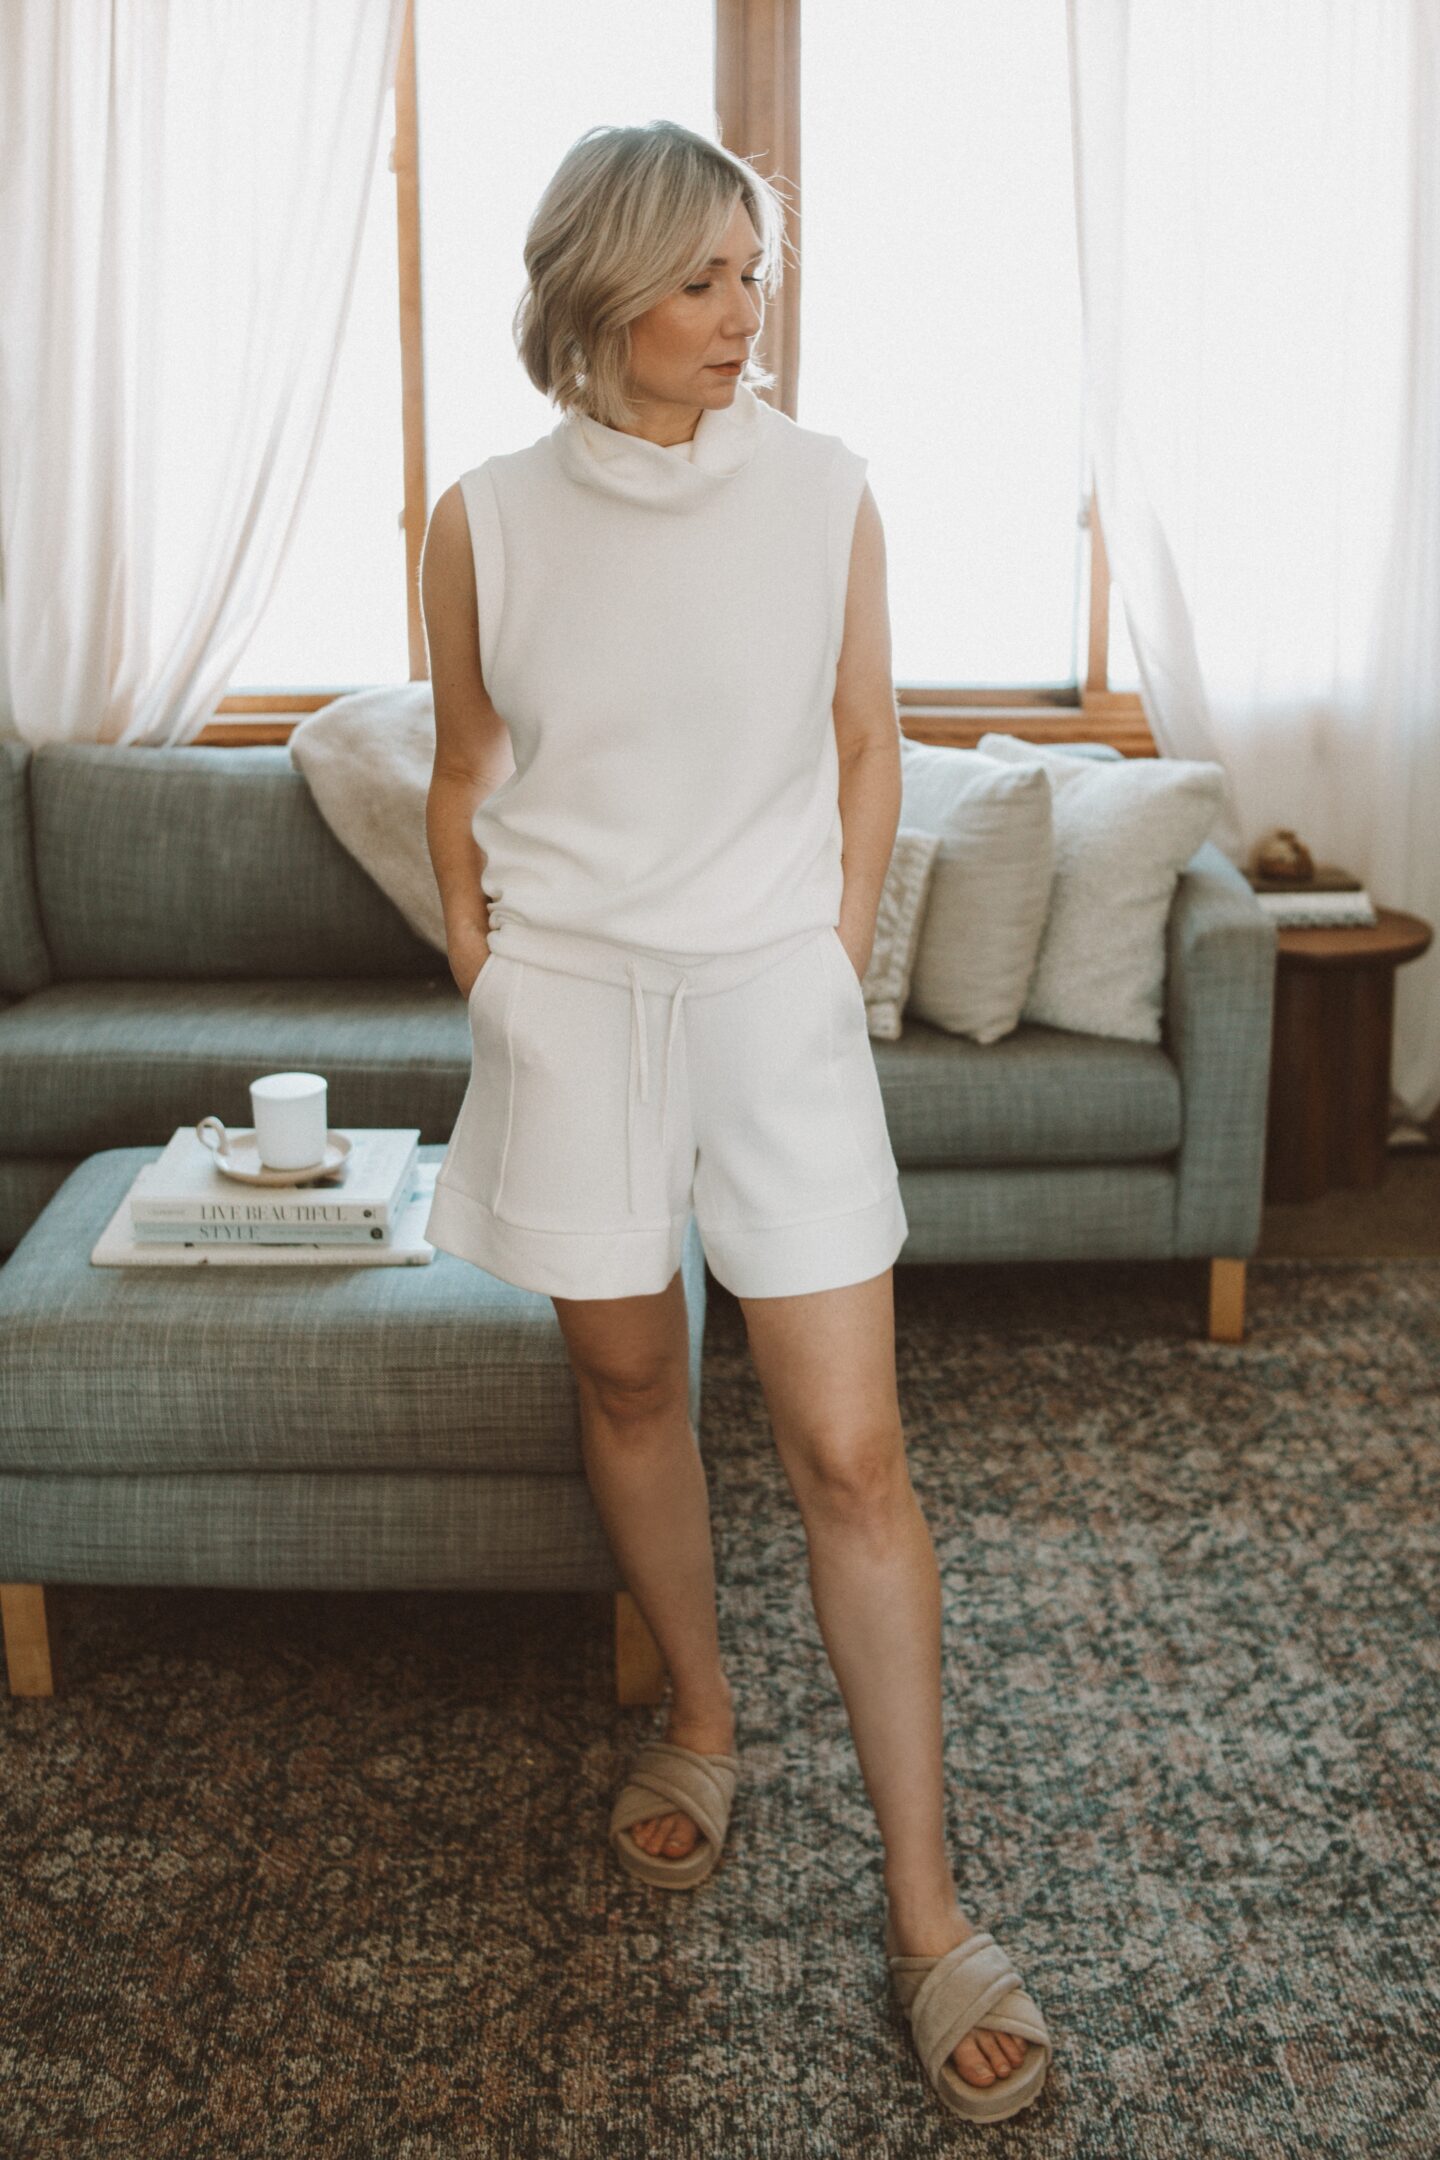 Karin Emily stands on her rug in front of her gray sofa and ottoman in her living room wearing a white top and shorts from Varley